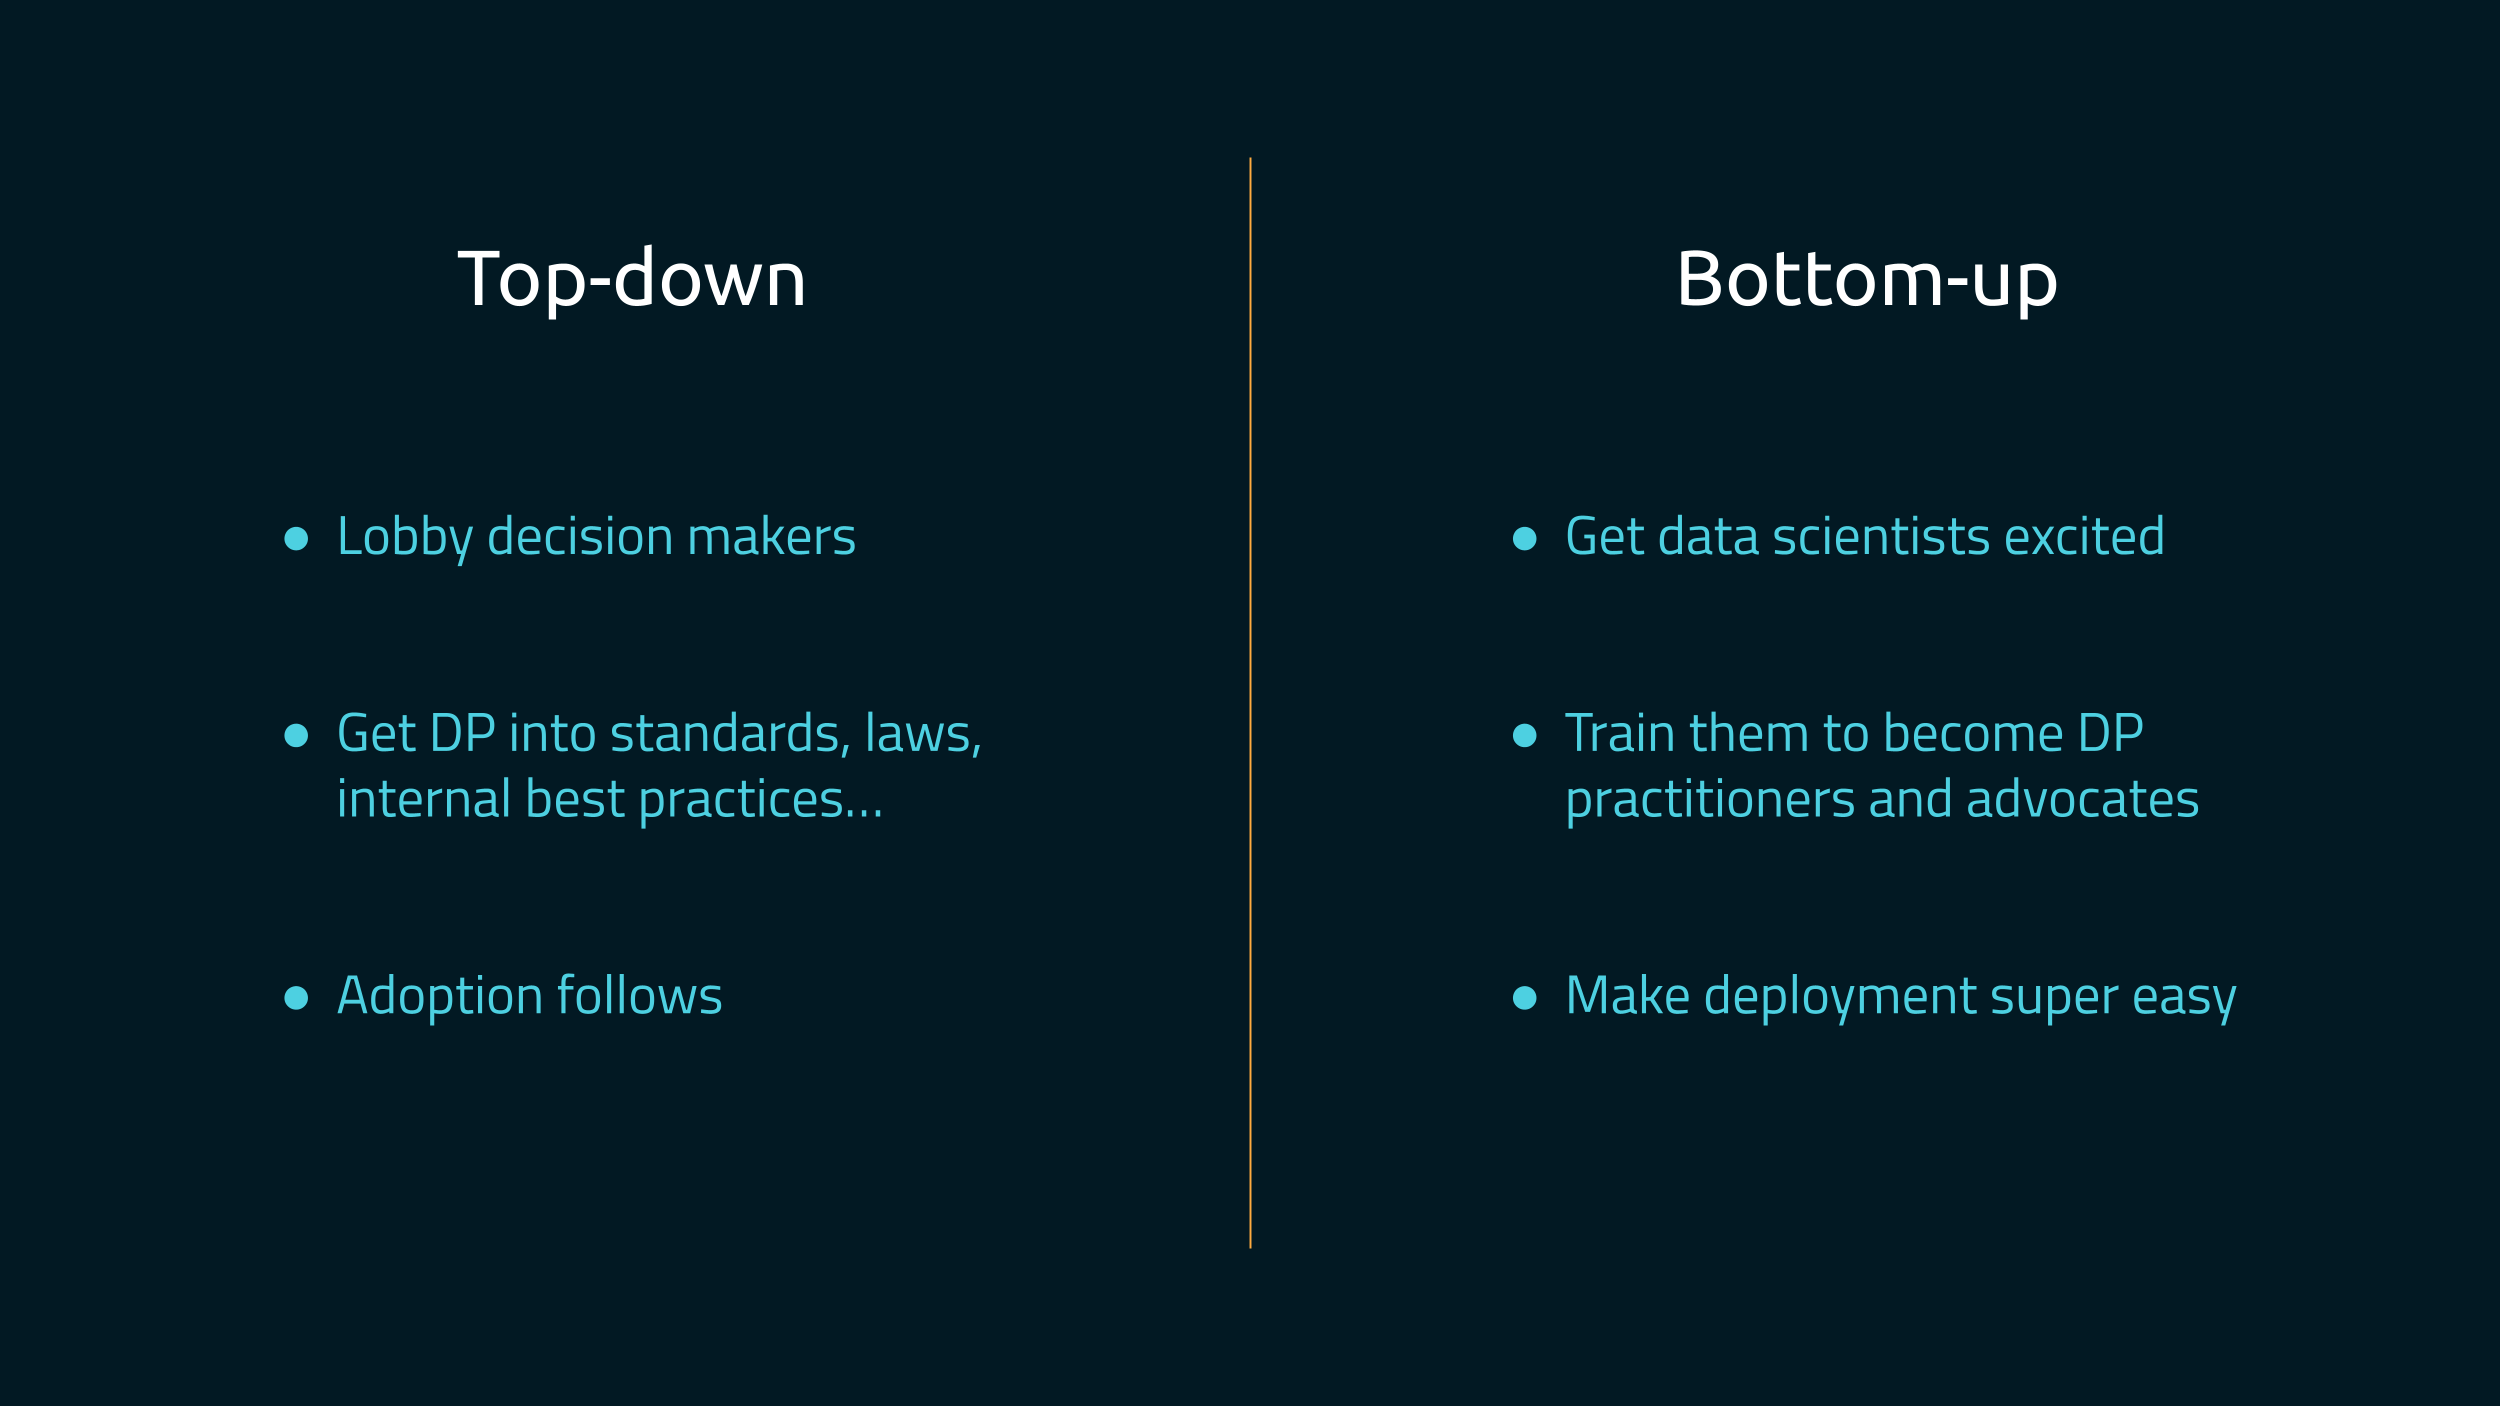 The same slide as before, with the right part filled in. The title is
"Bottom-up", and lists three bullet points: "Get data scientists excited",
"Train them to become DP practitioners and advocates", and "Make deployment
super easy".